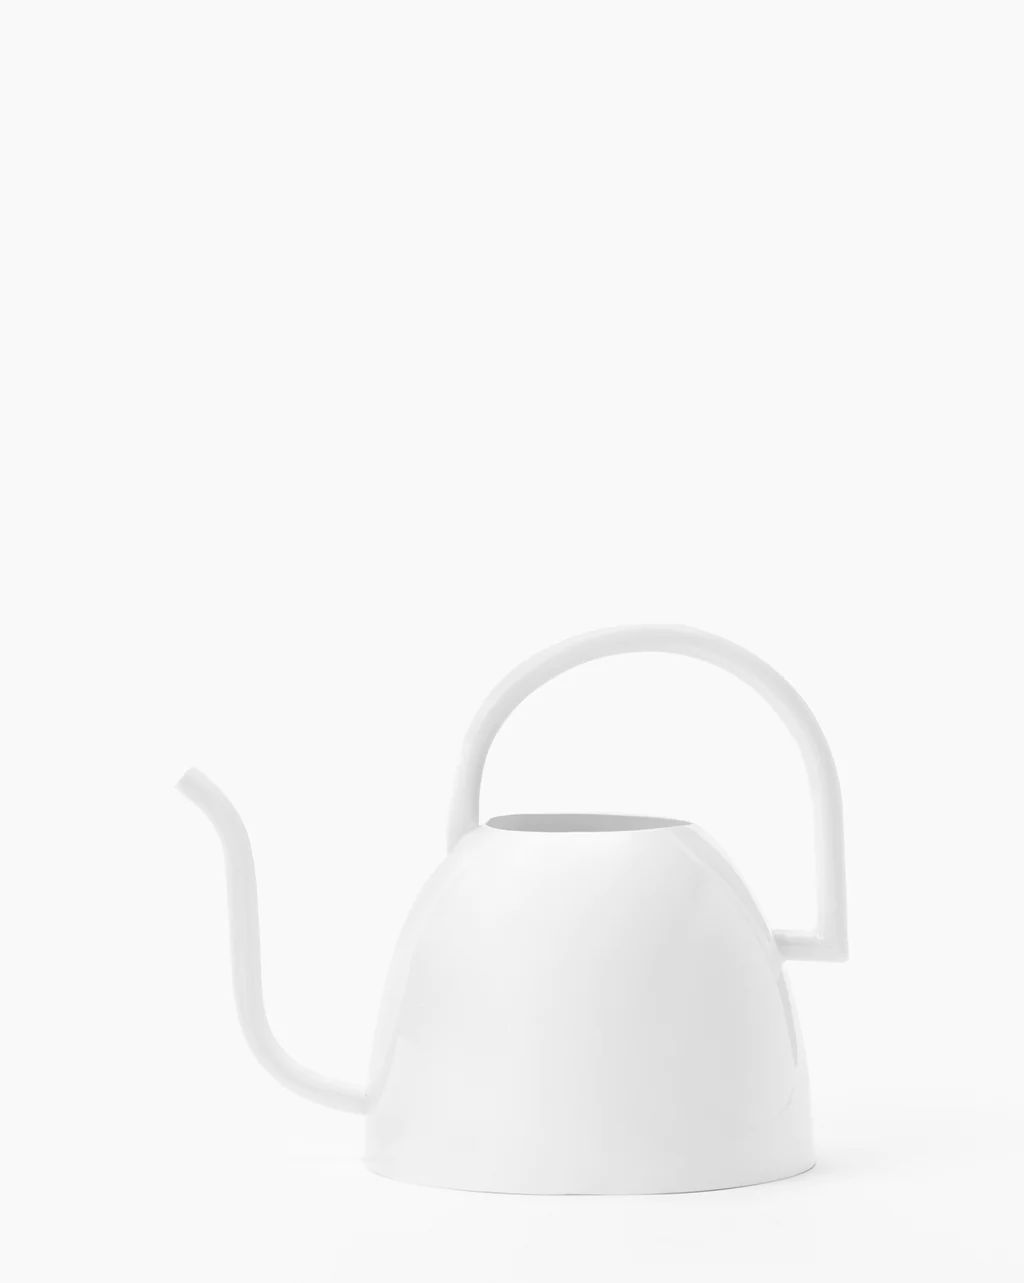 Lotte Watering Can | McGee & Co.